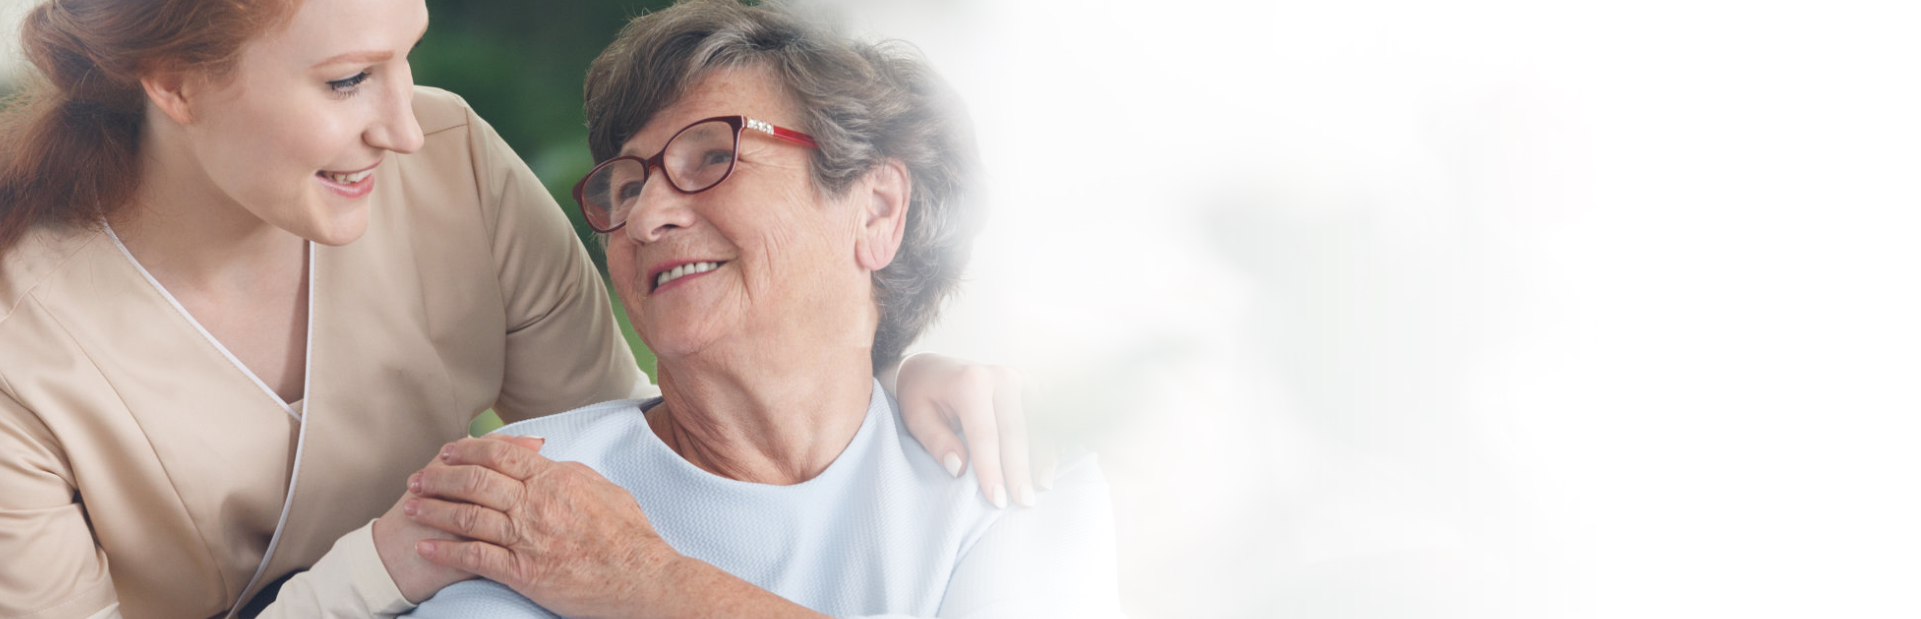 caregiver and senior woman smiling with each other